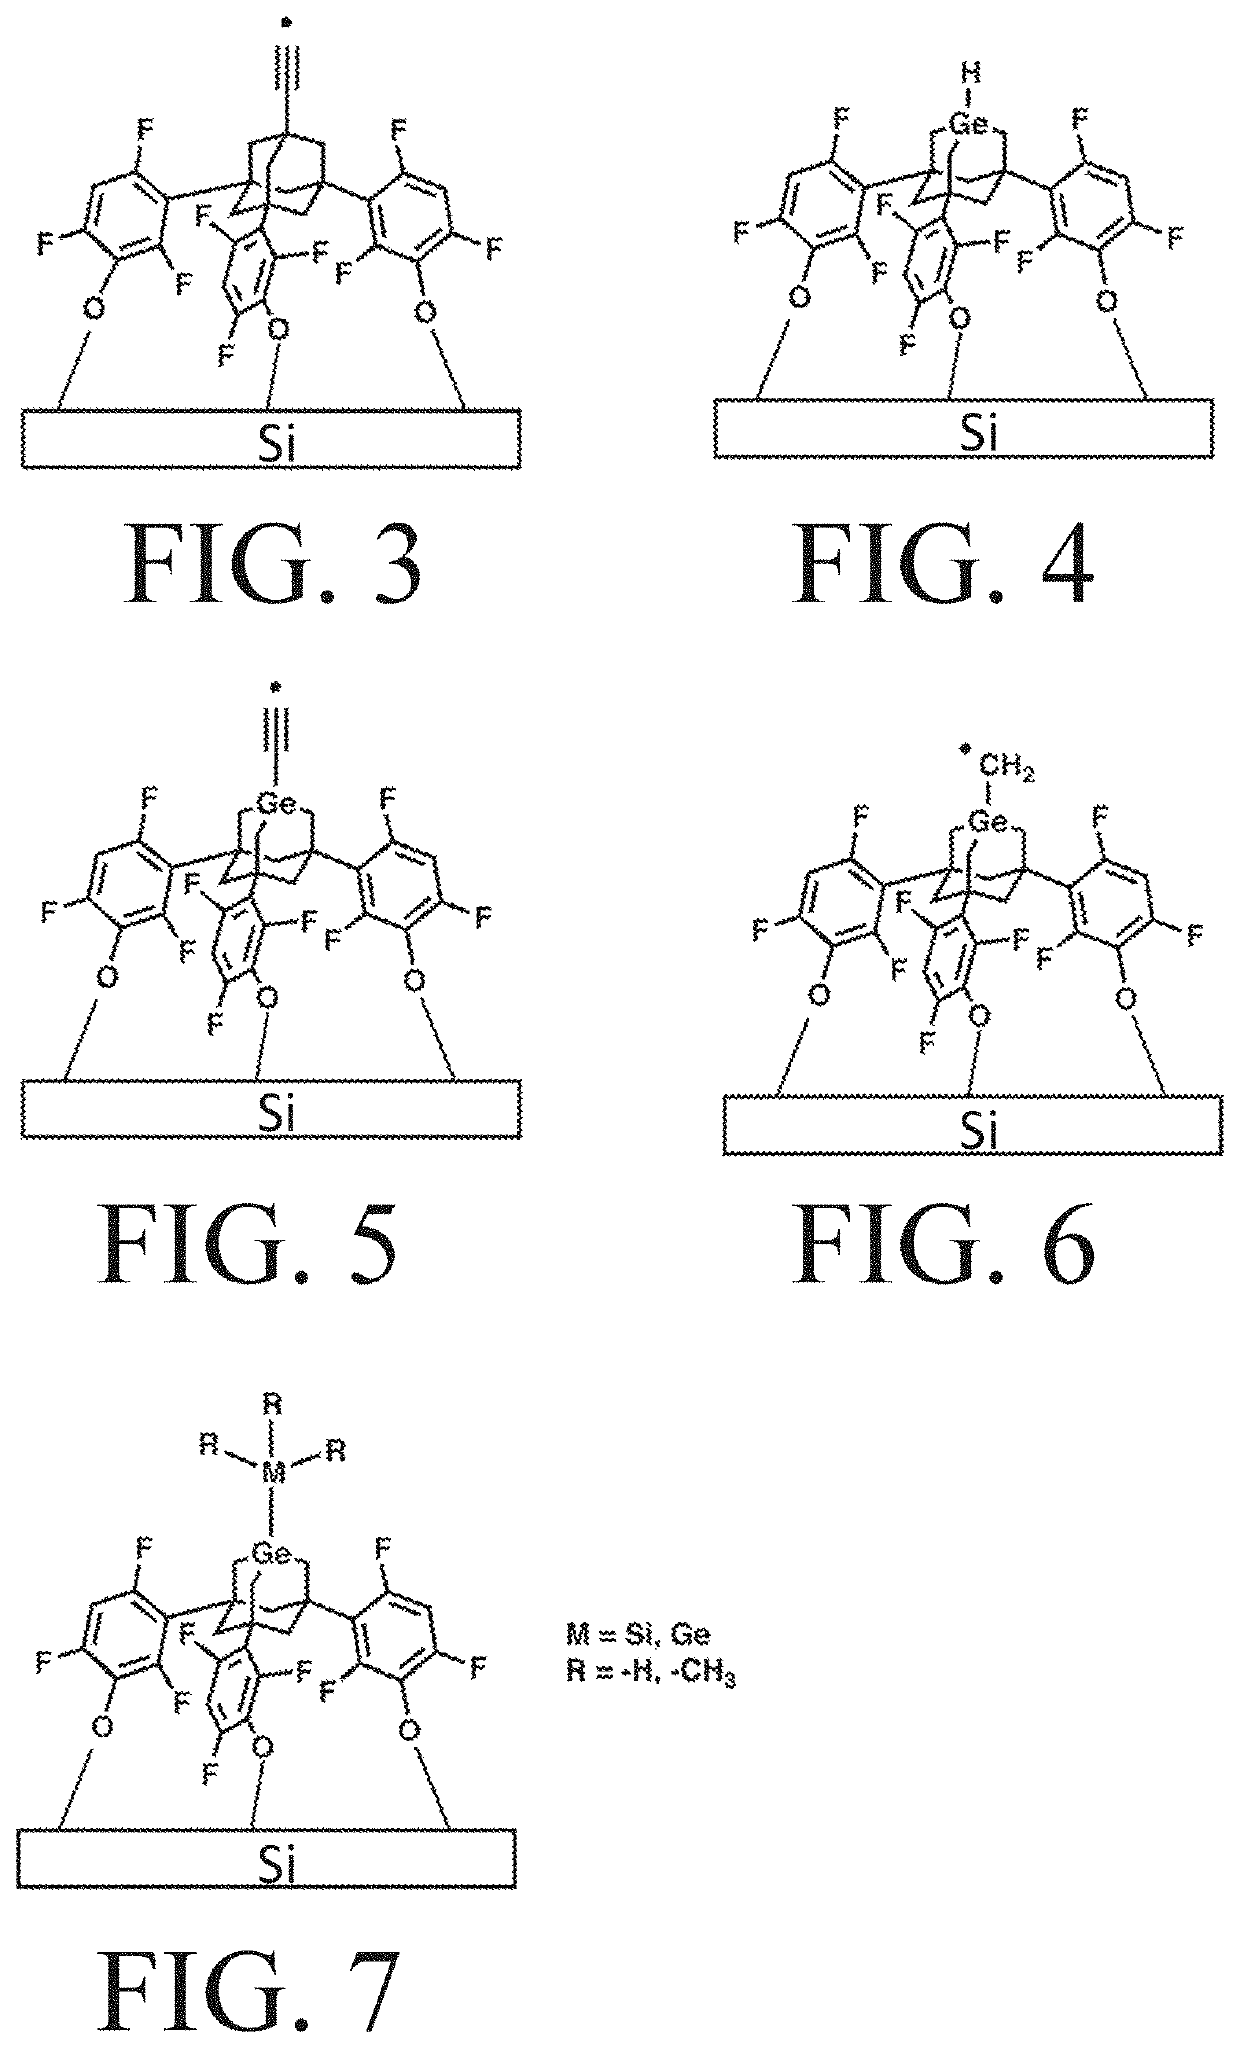 Systems and Methods for Mechanosynthesis